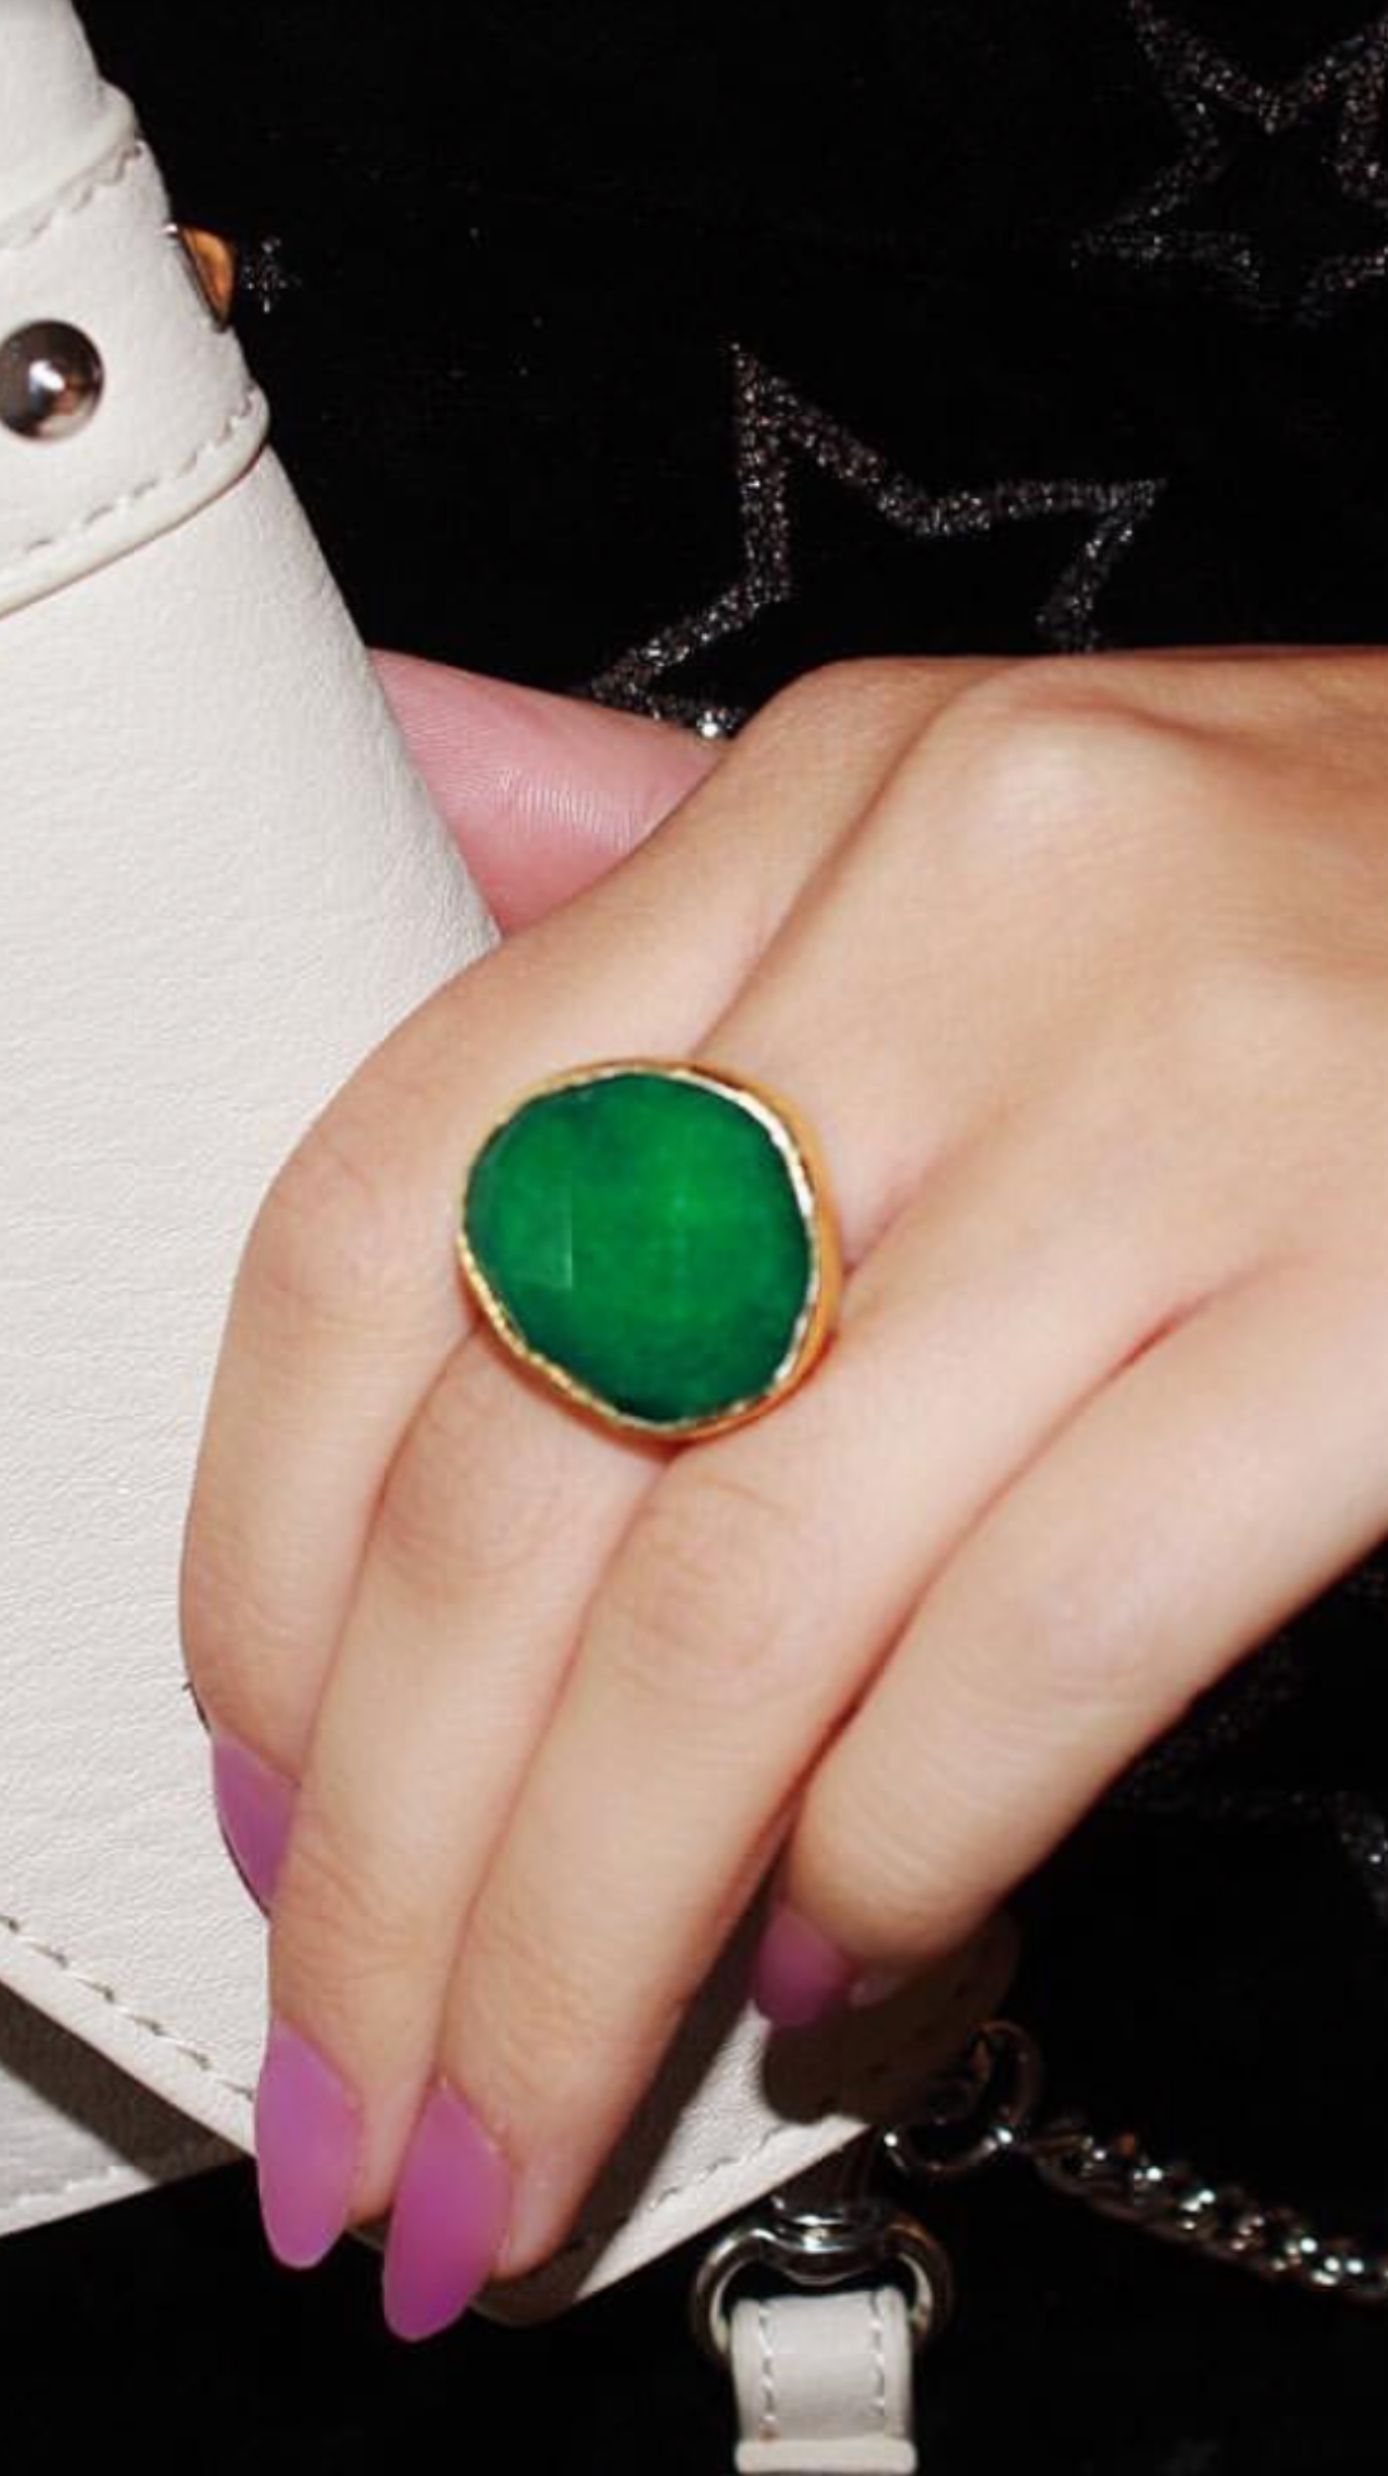 Emerald Ring In 18kt Yellow Gold Vermeil